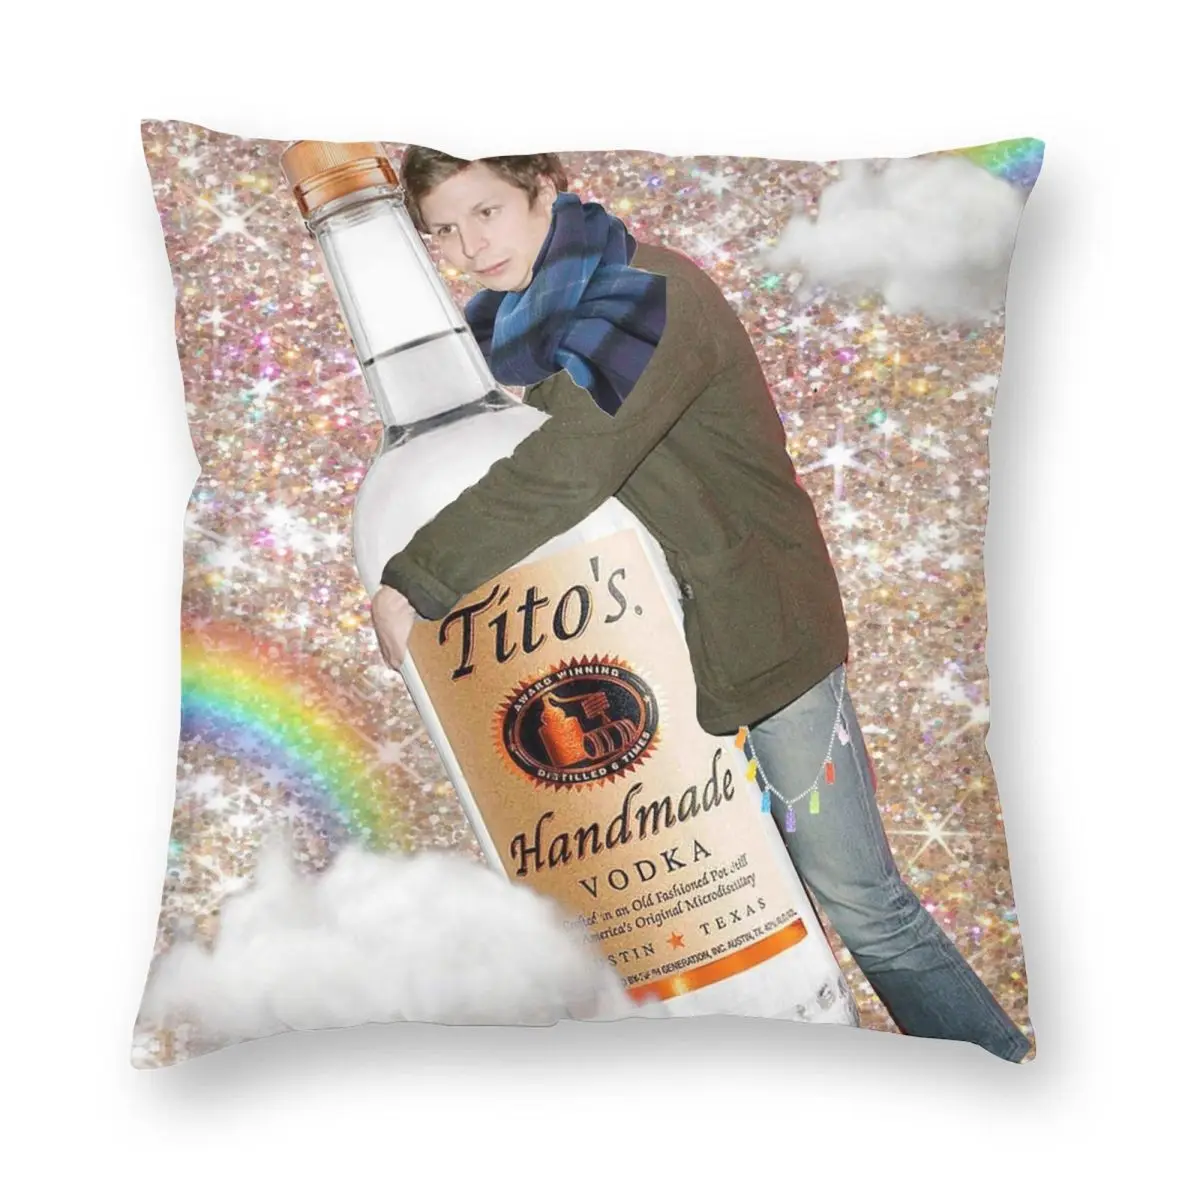 

Glitter Michael Funny College Pillowcase Printed Polyester Cushion Cover Gift Throw Pillow Case Cover Home Zippered 40X40cm